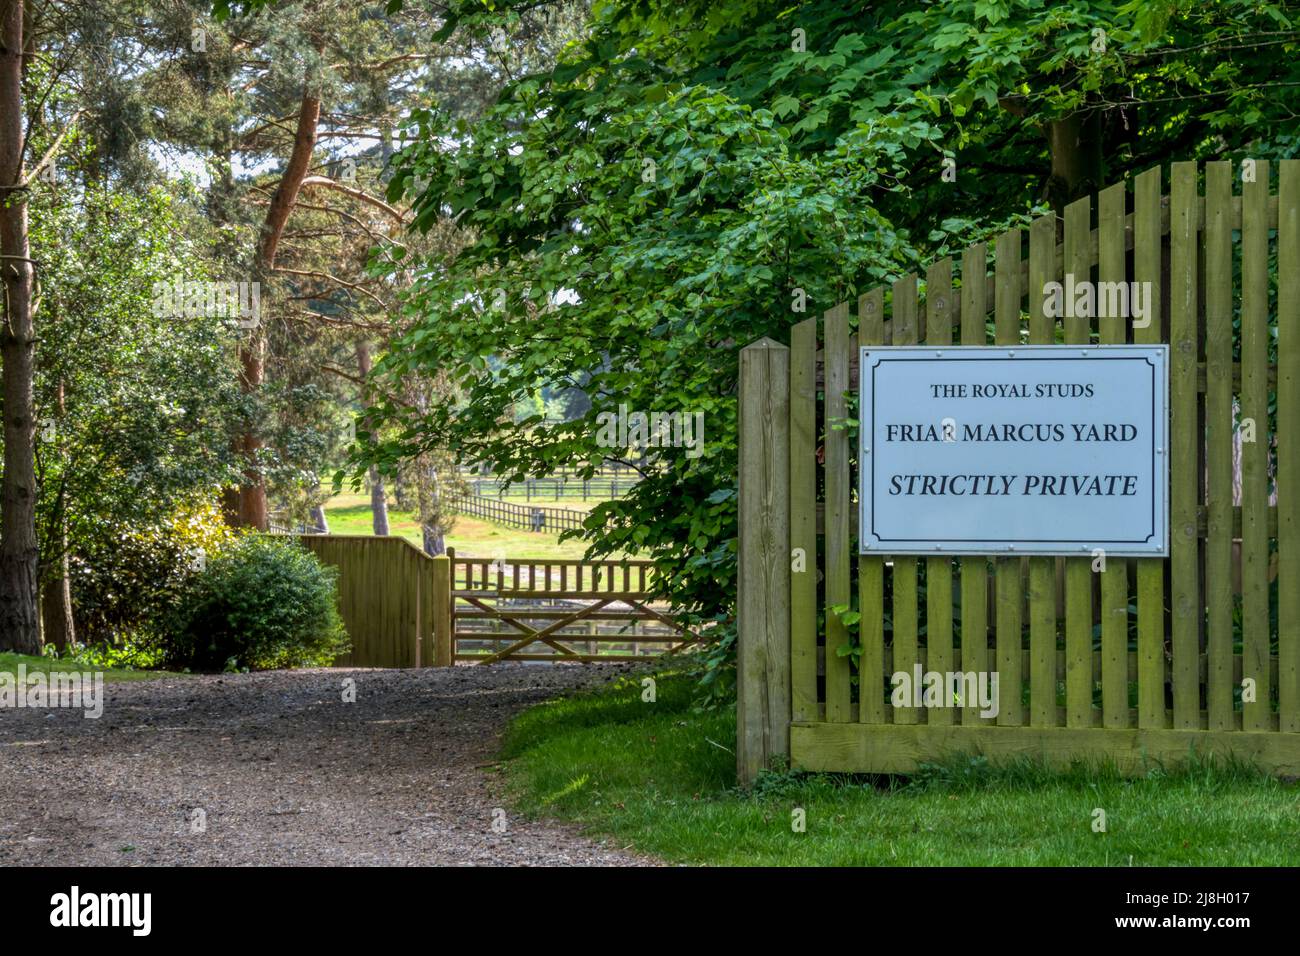 Entrance to Friar Marcus Yard, part of the Royal Stud at Wolferton on the Sandringham Estate. Stock Photo